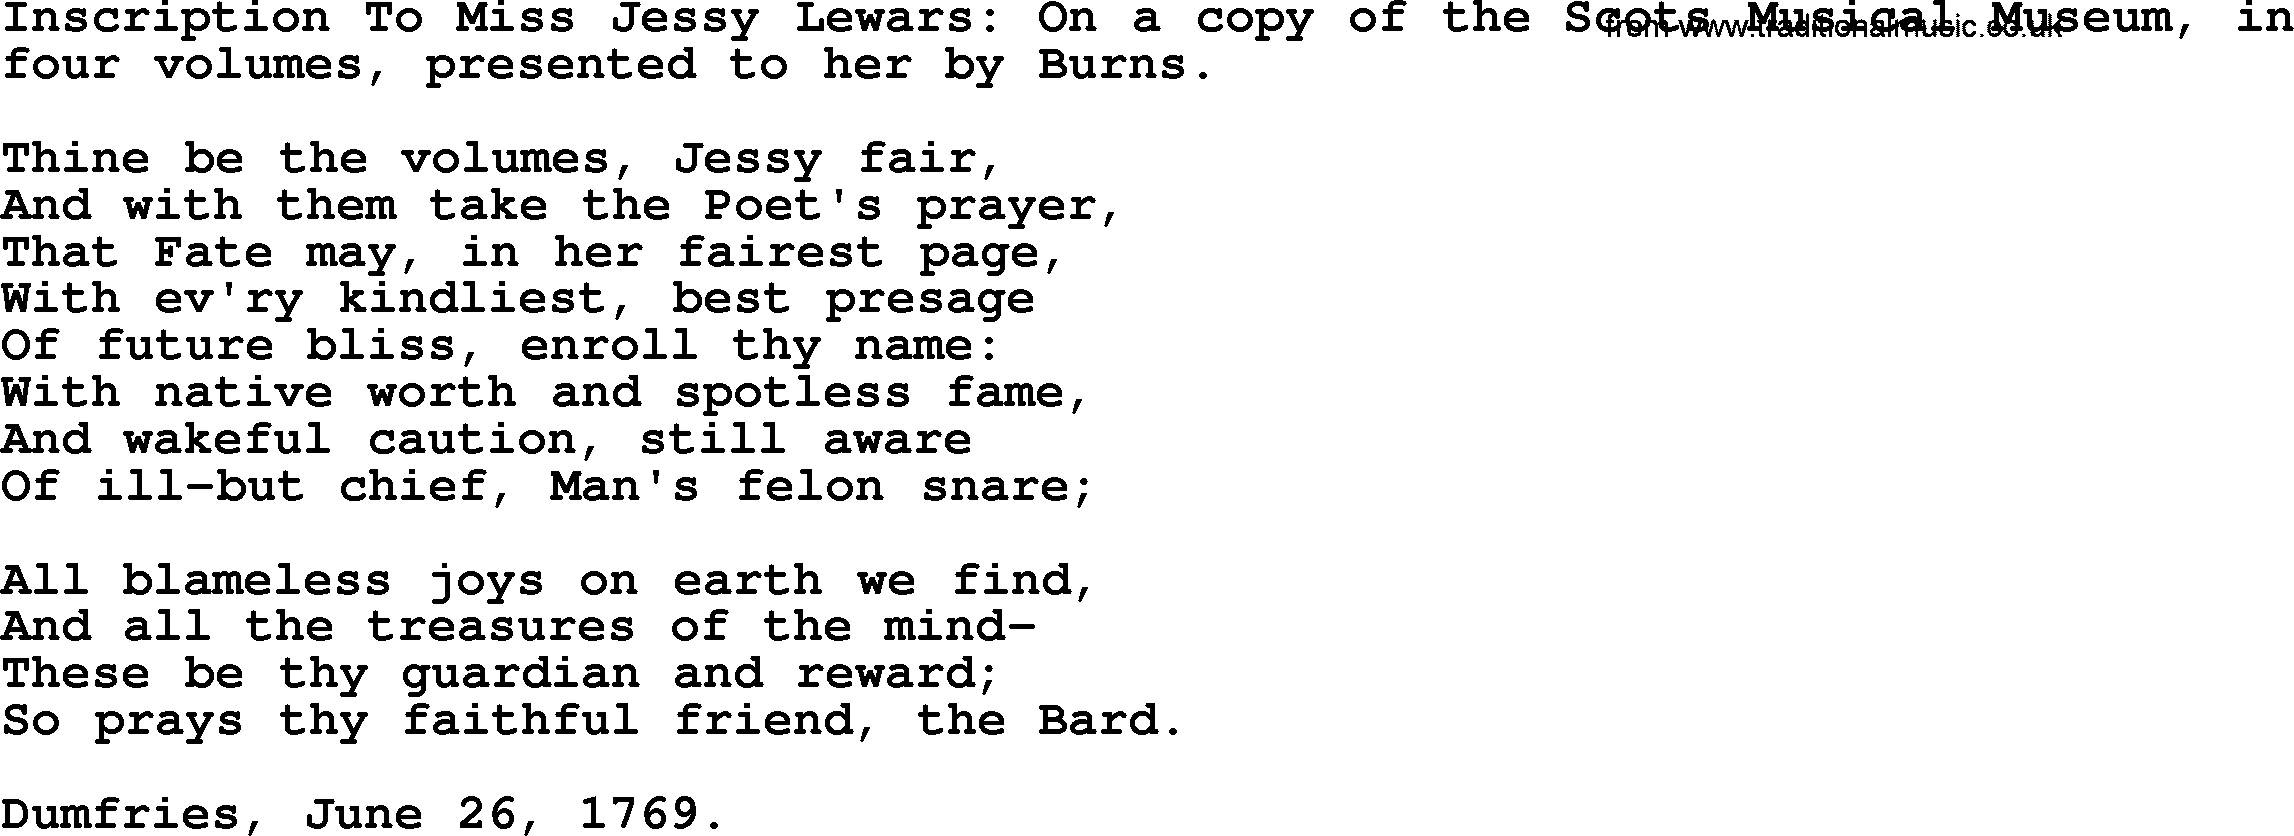 Robert Burns Songs & Lyrics: Inscription To Miss Jessy Lewars On A Copy Of The Scots Musical Museum